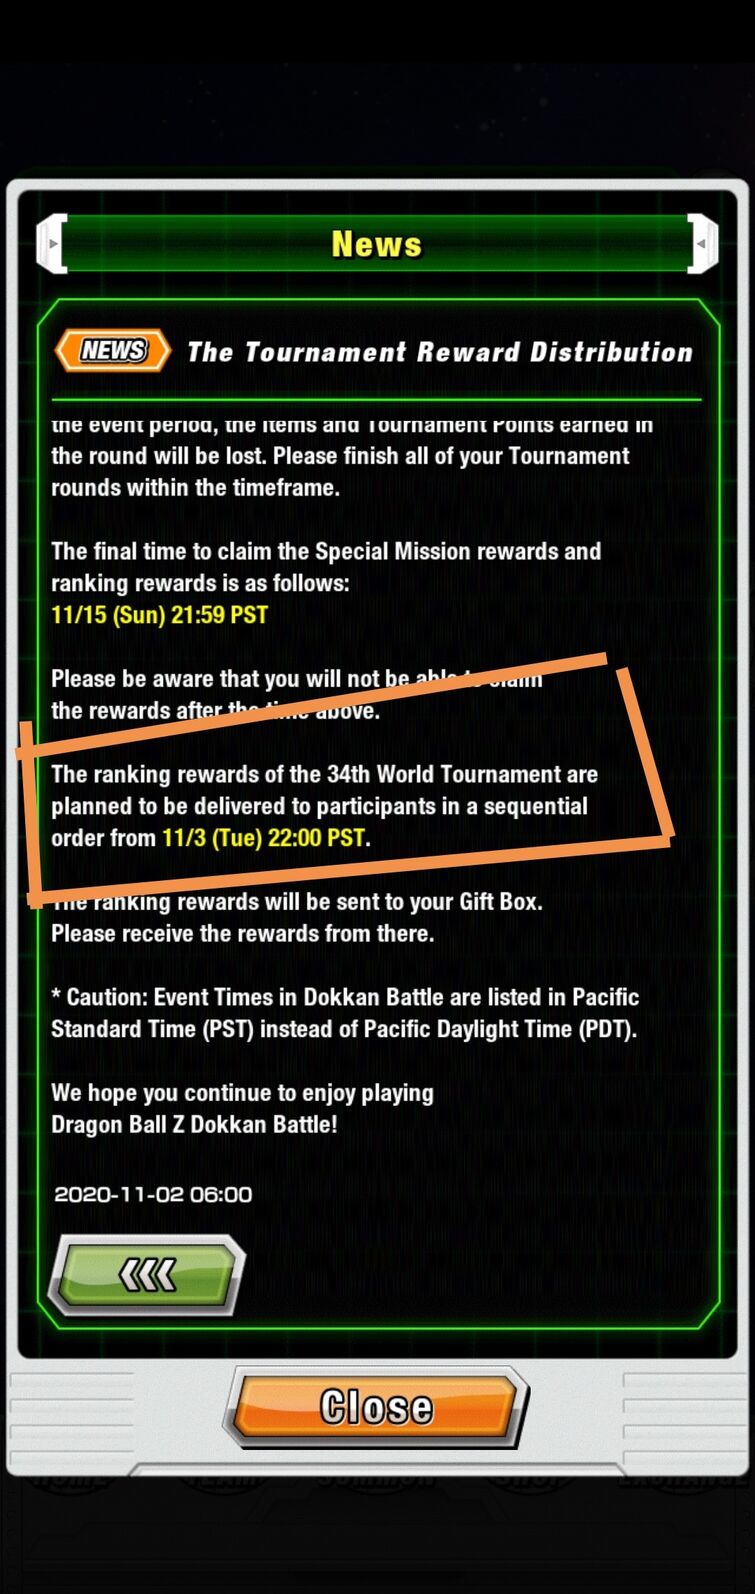 HOW TO CLAIM REWARDS FROM TOURNAMENT